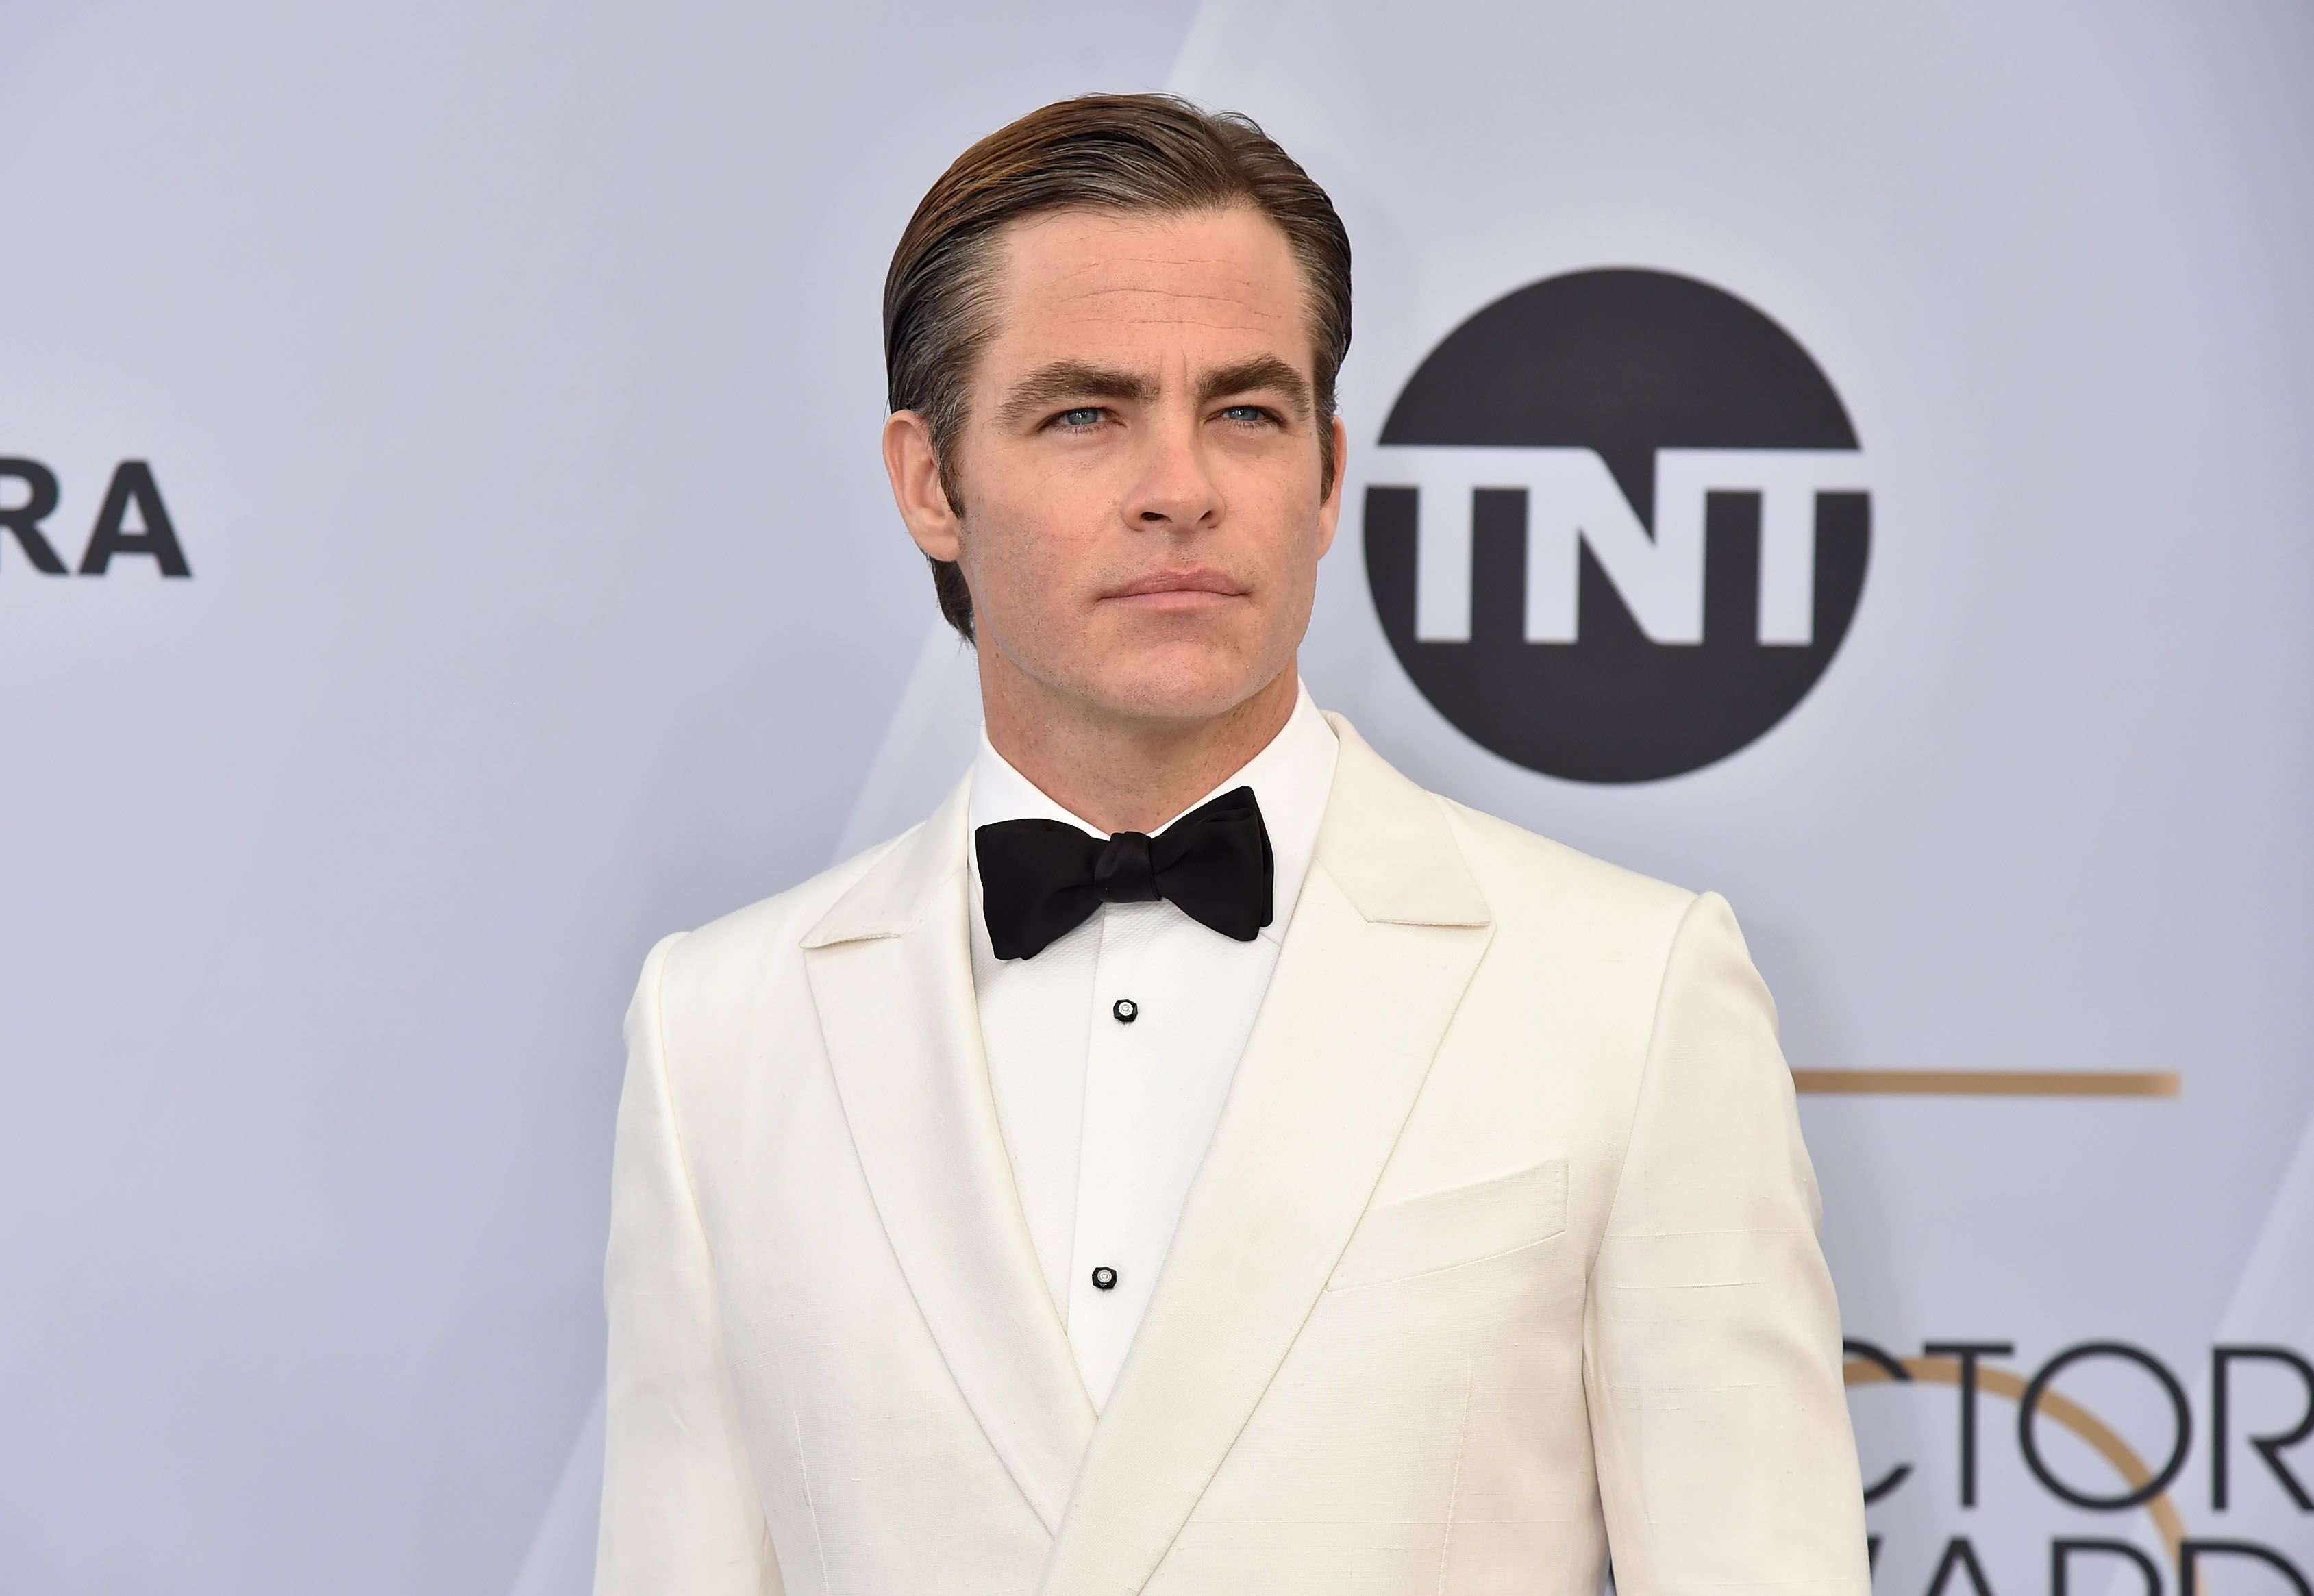 Chris Pine during the 25th Annual Screen Actors Guild Awards at The Shrine Auditorium on January 27, 2019, in Los Angeles, California. | Source: Getty Images